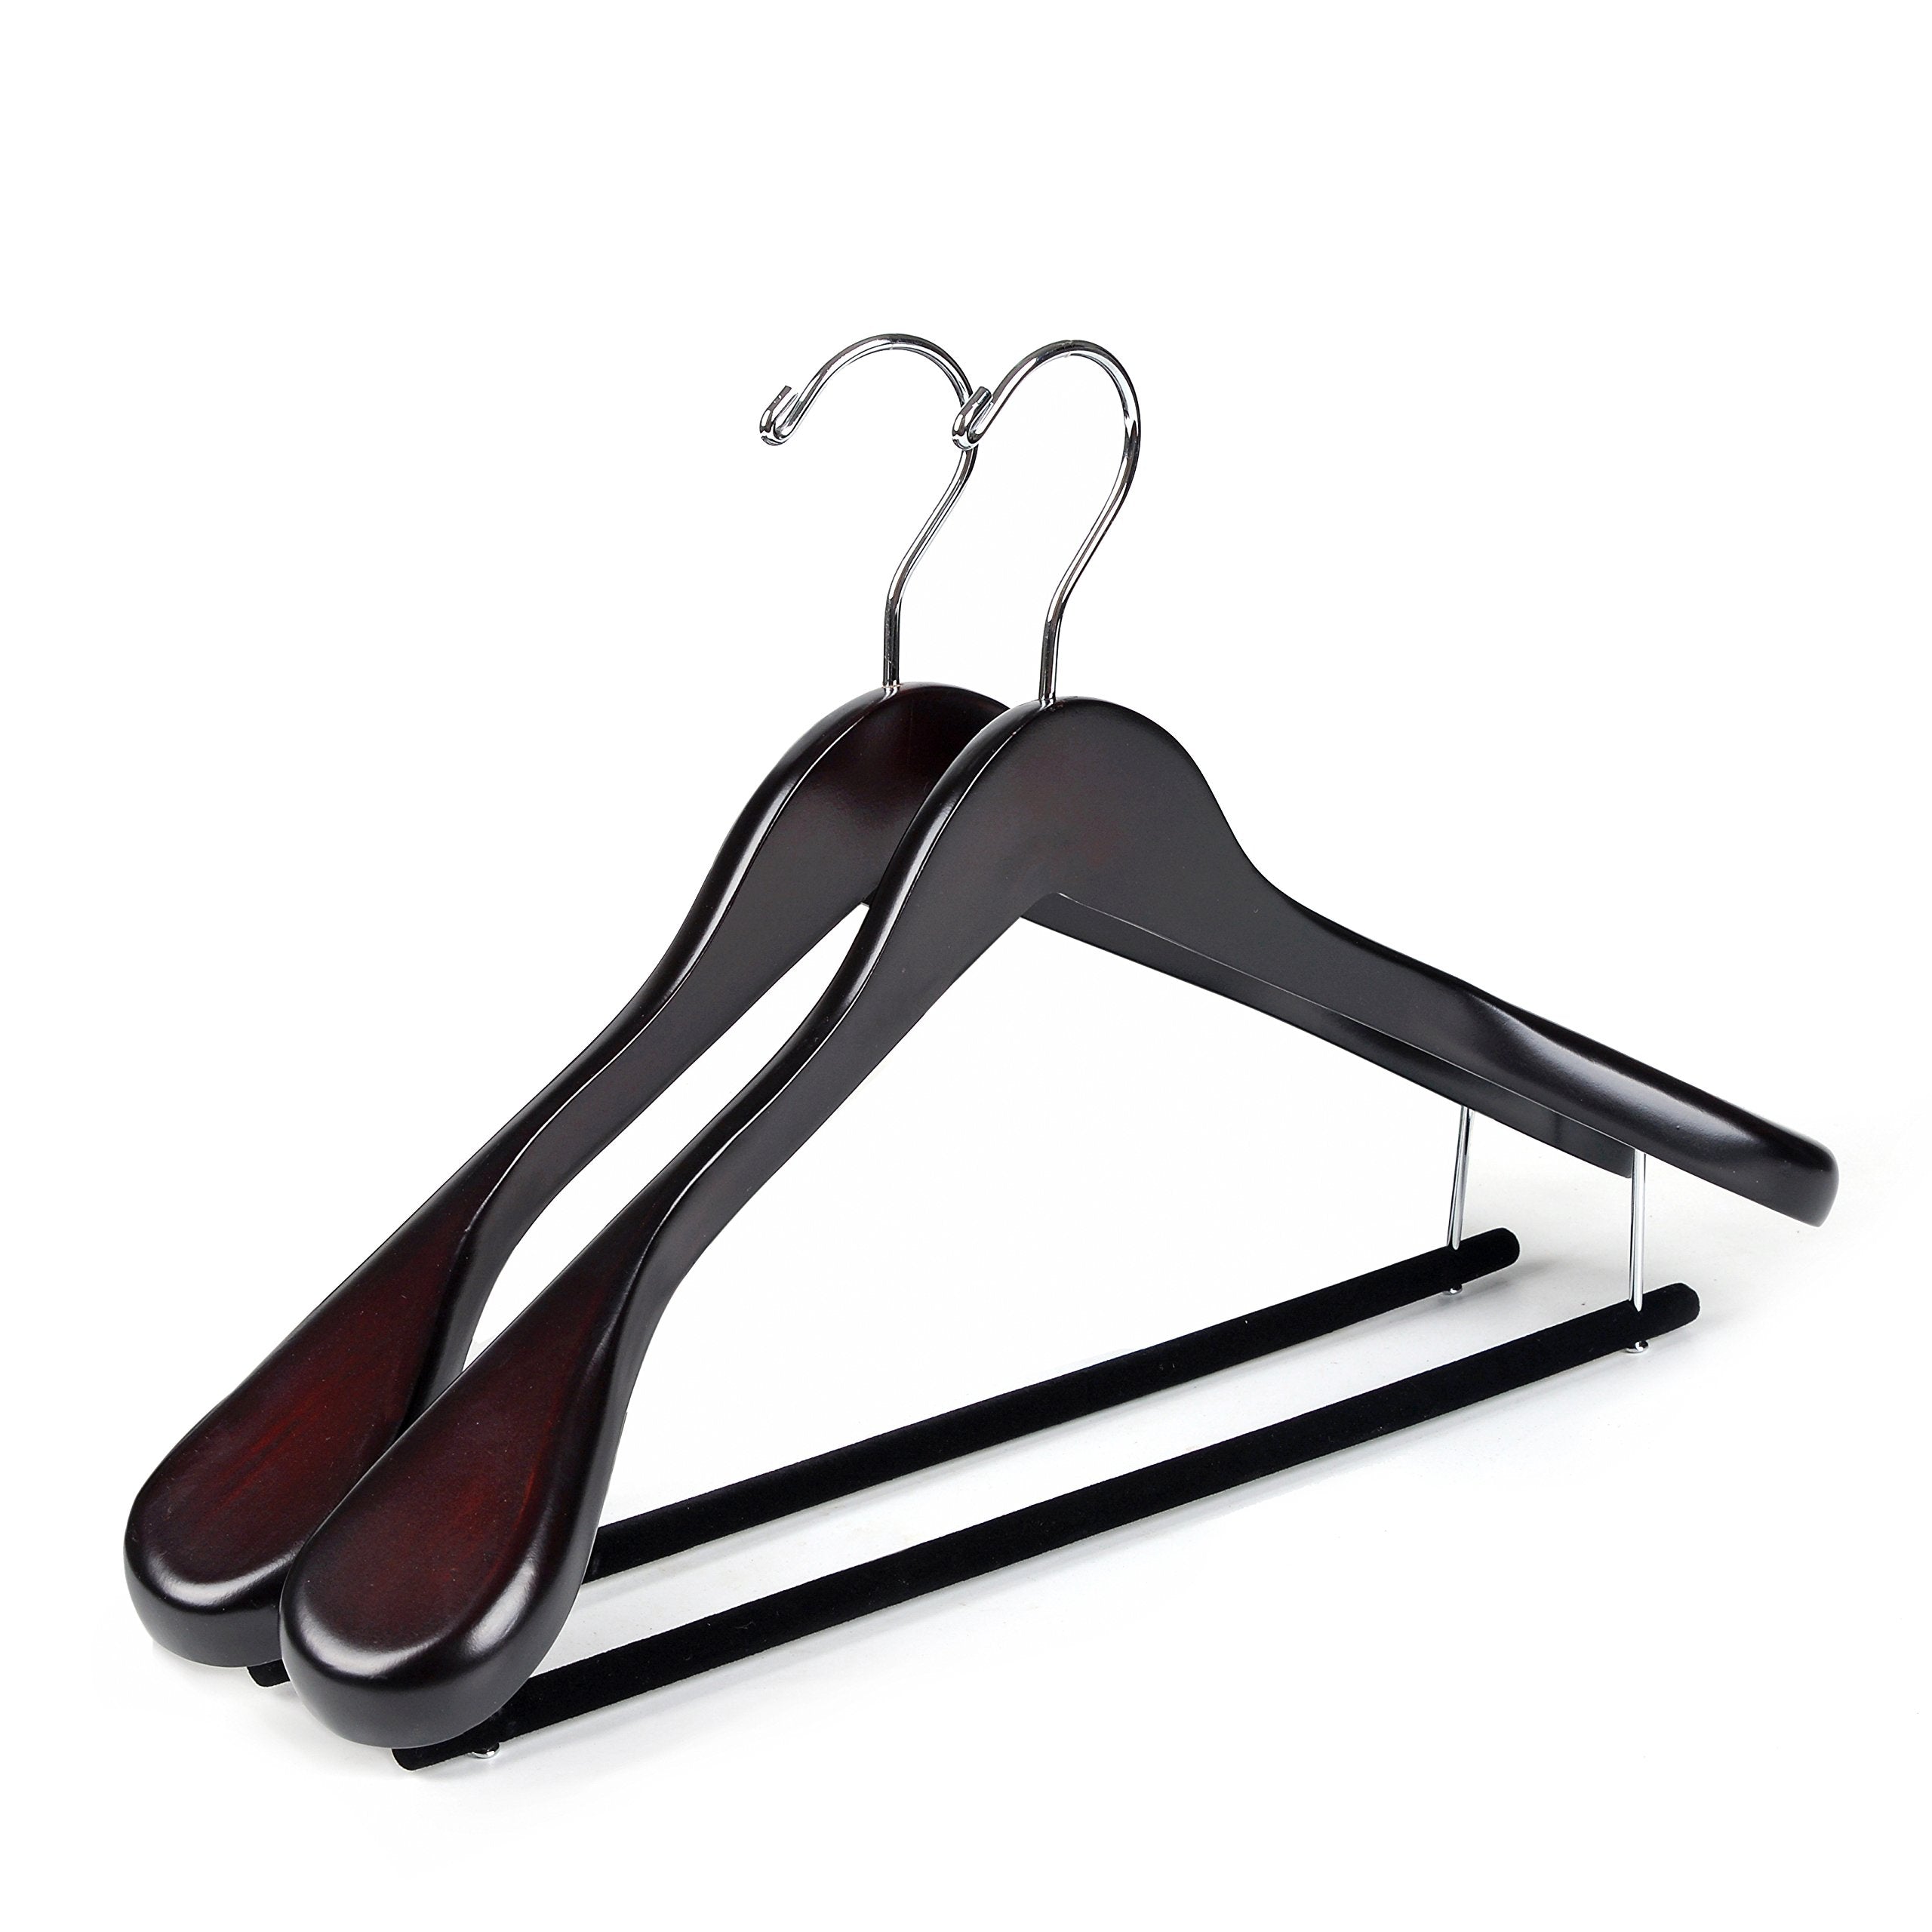 Quality Luxury Wooden Suit Hangers Wide Wood Hanger for Coats and Pants Mahogany Finish  - Like New